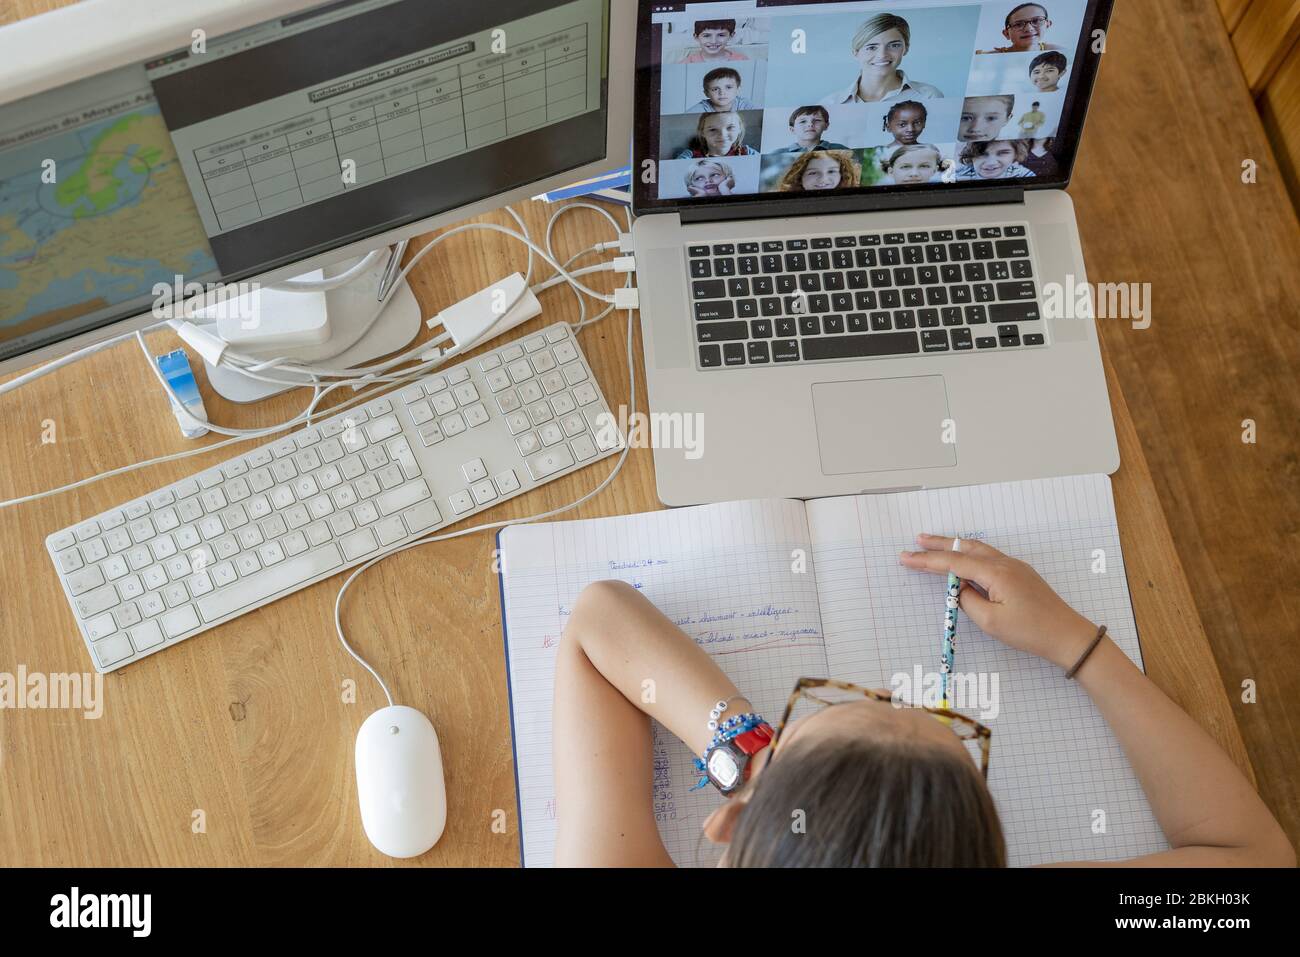 Girl attending online school classes from home Stock Photo